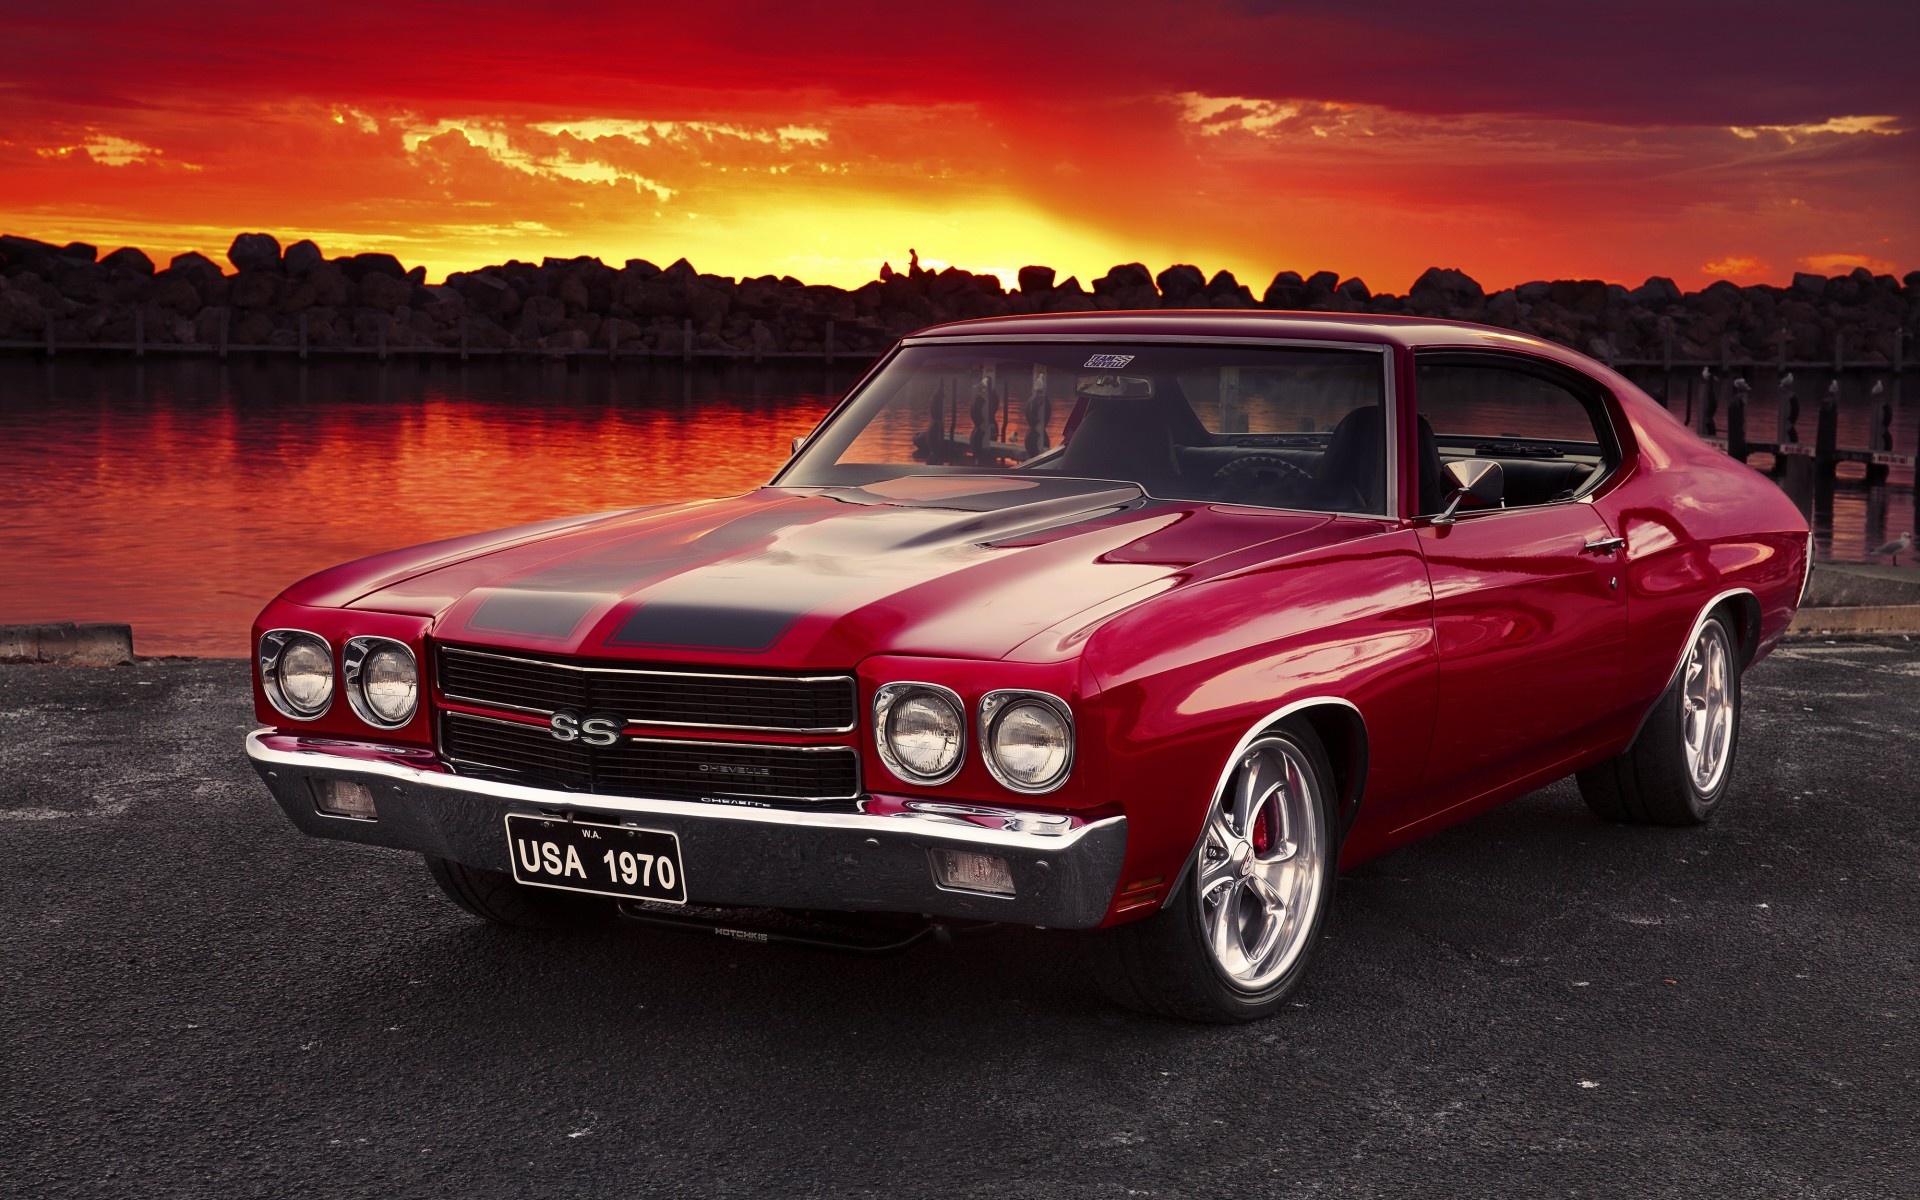 Chevrolet Chevelle gallery, Muscle car lineup, Retro styling, Chrome accents, Collector cars, 1920x1200 HD Desktop